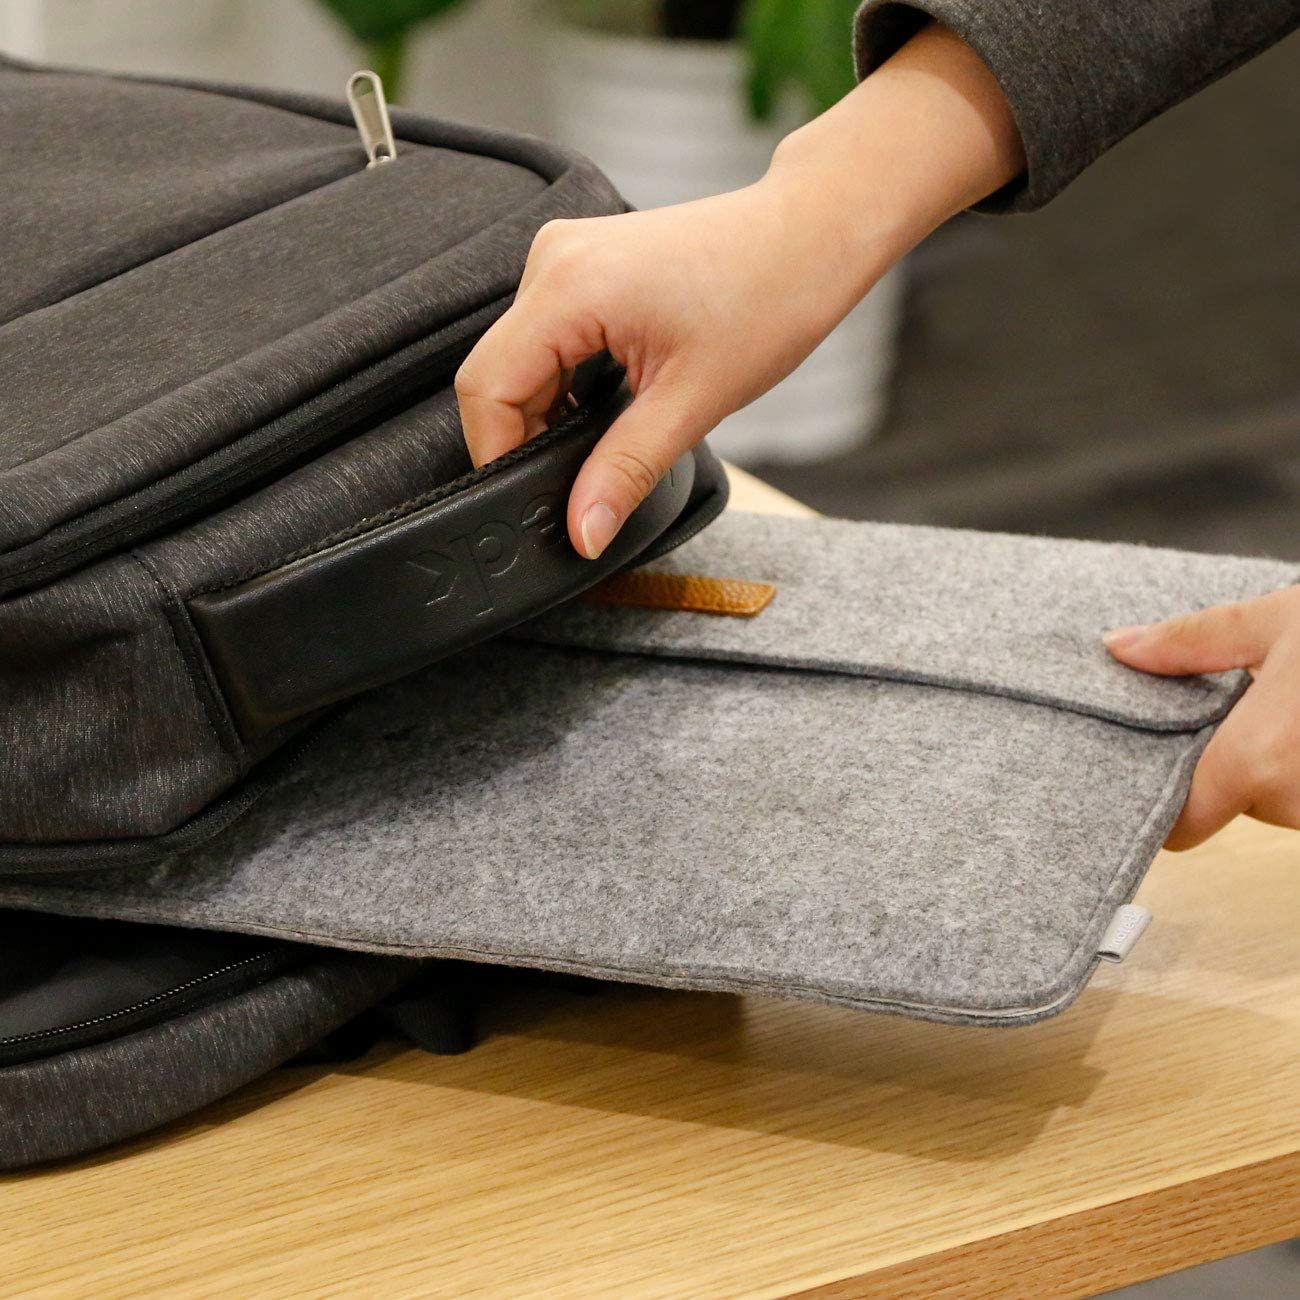 Inateck MacBook Pro Sleeve in use